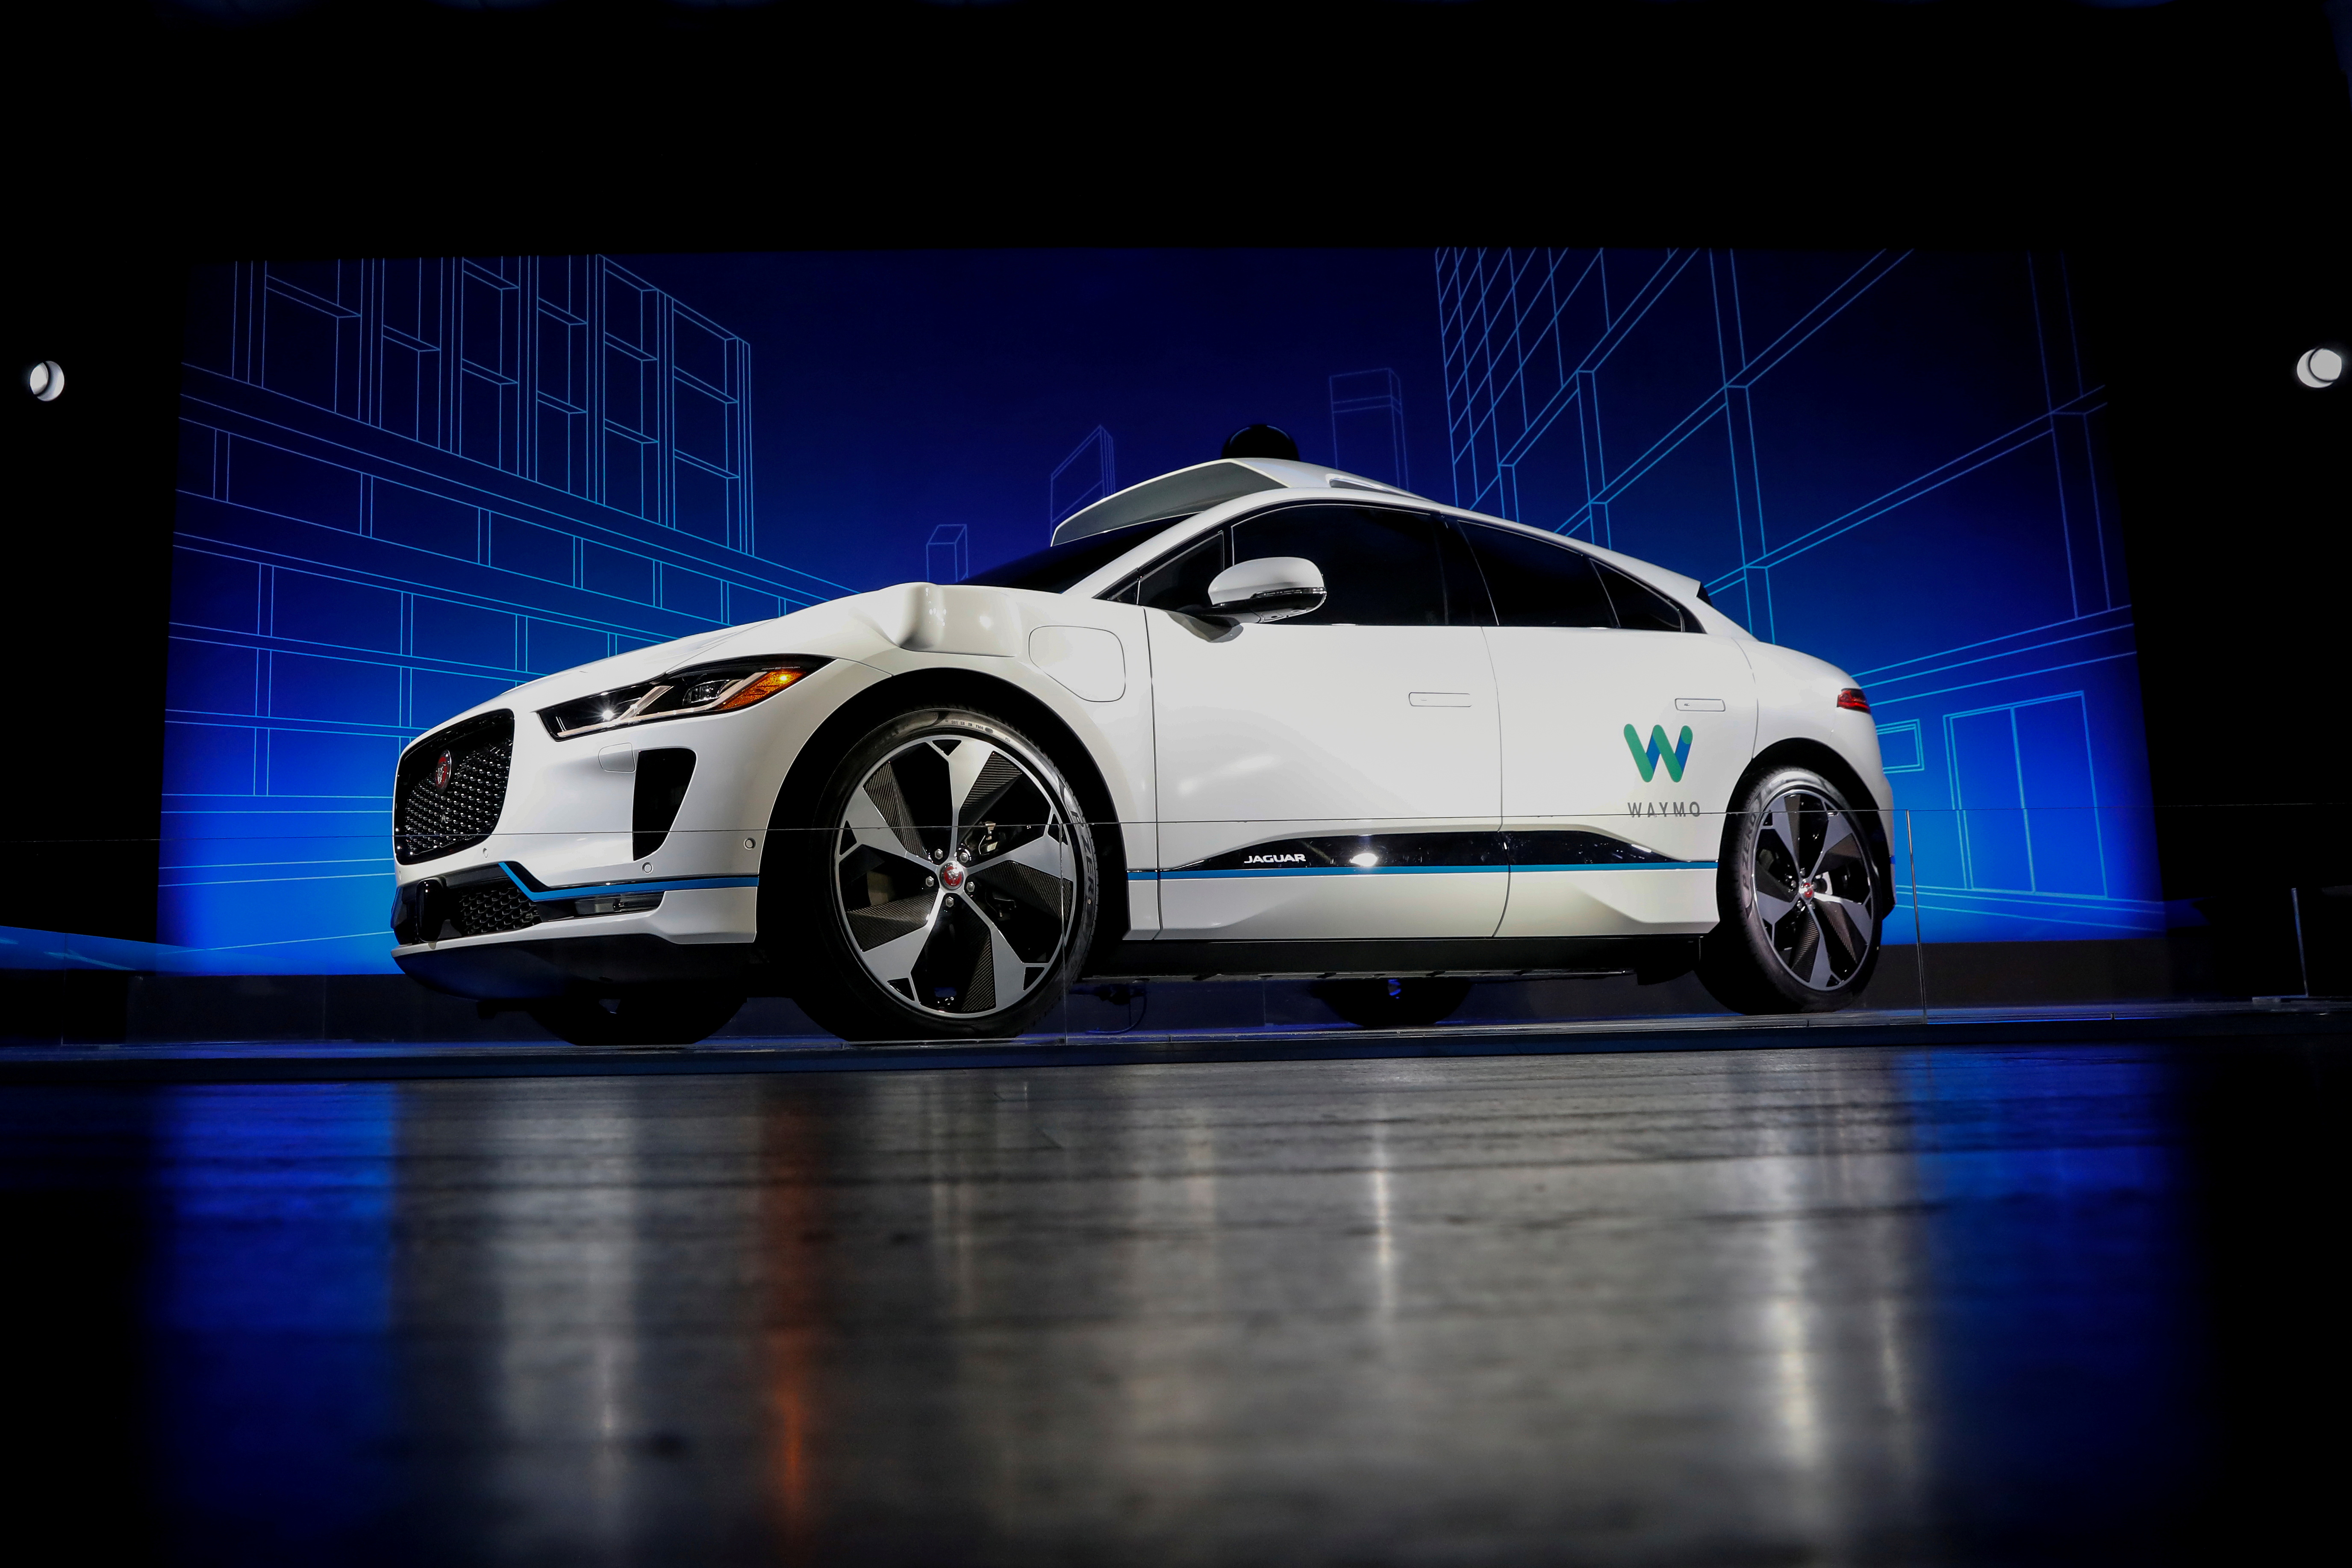 A Jaguar I-PACE self-driving car is pictured during its unveiling by Waymo in the Manhattan borough of New York